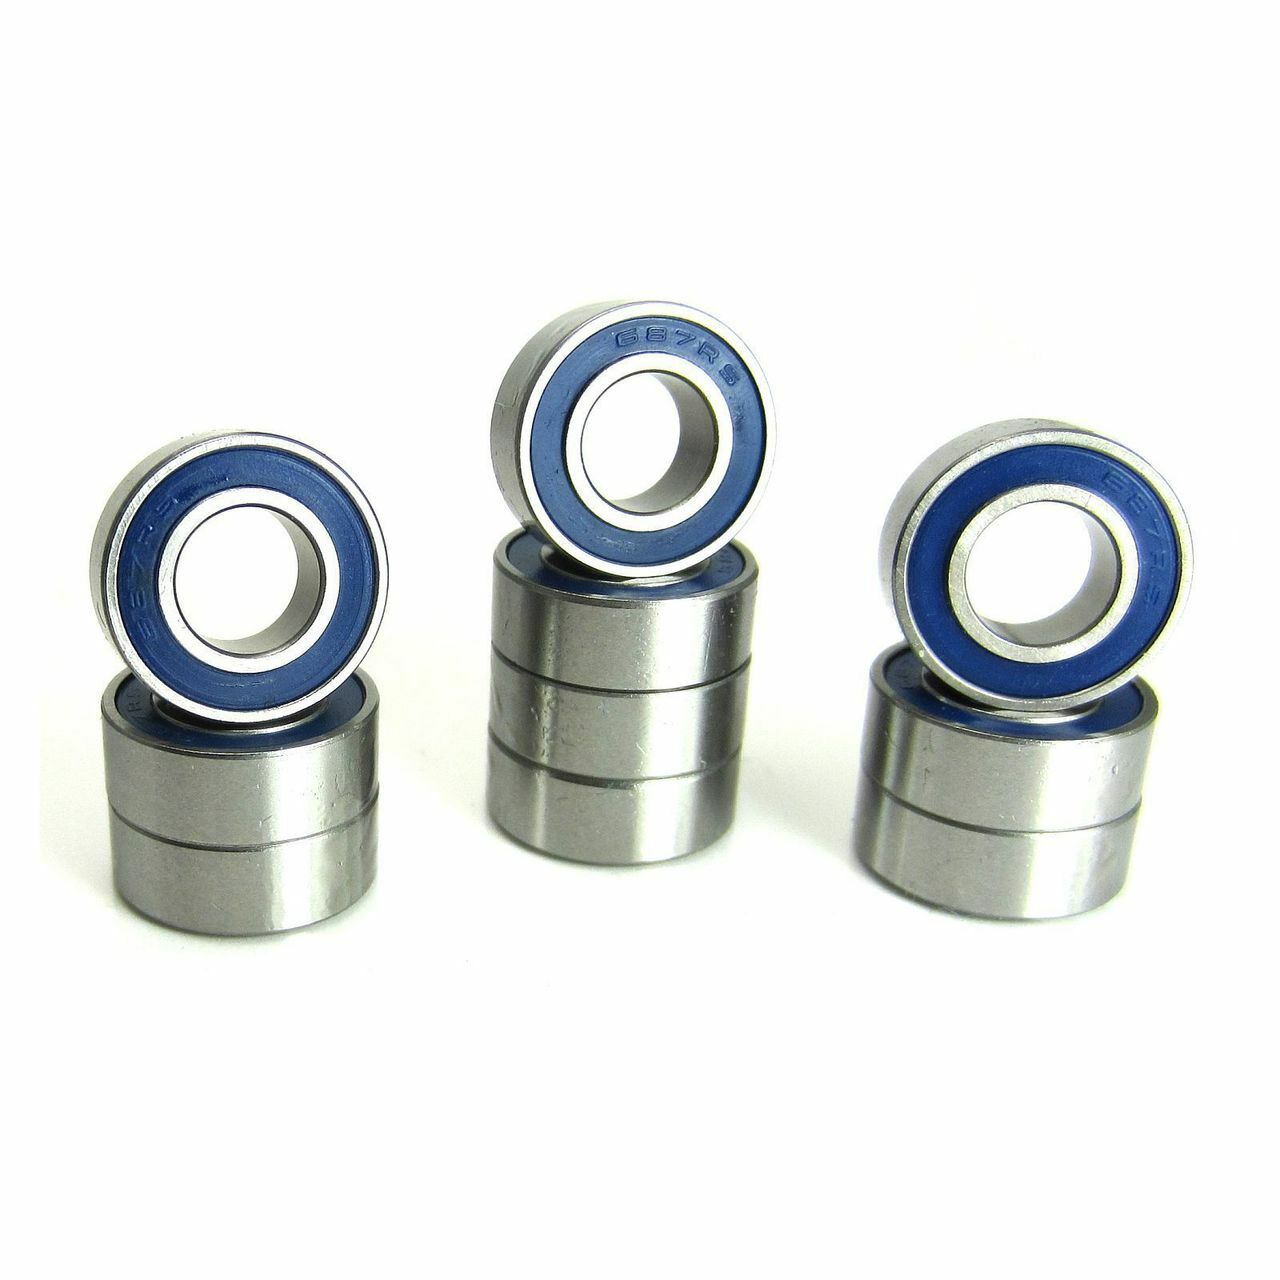 687-2RS 7x14x5 Precision High Speed RC Car Ball Bearing, Chrome Steel (GCr15) with Blue Rubber Seals ABEC-1 ABEC-3 ABEC-5